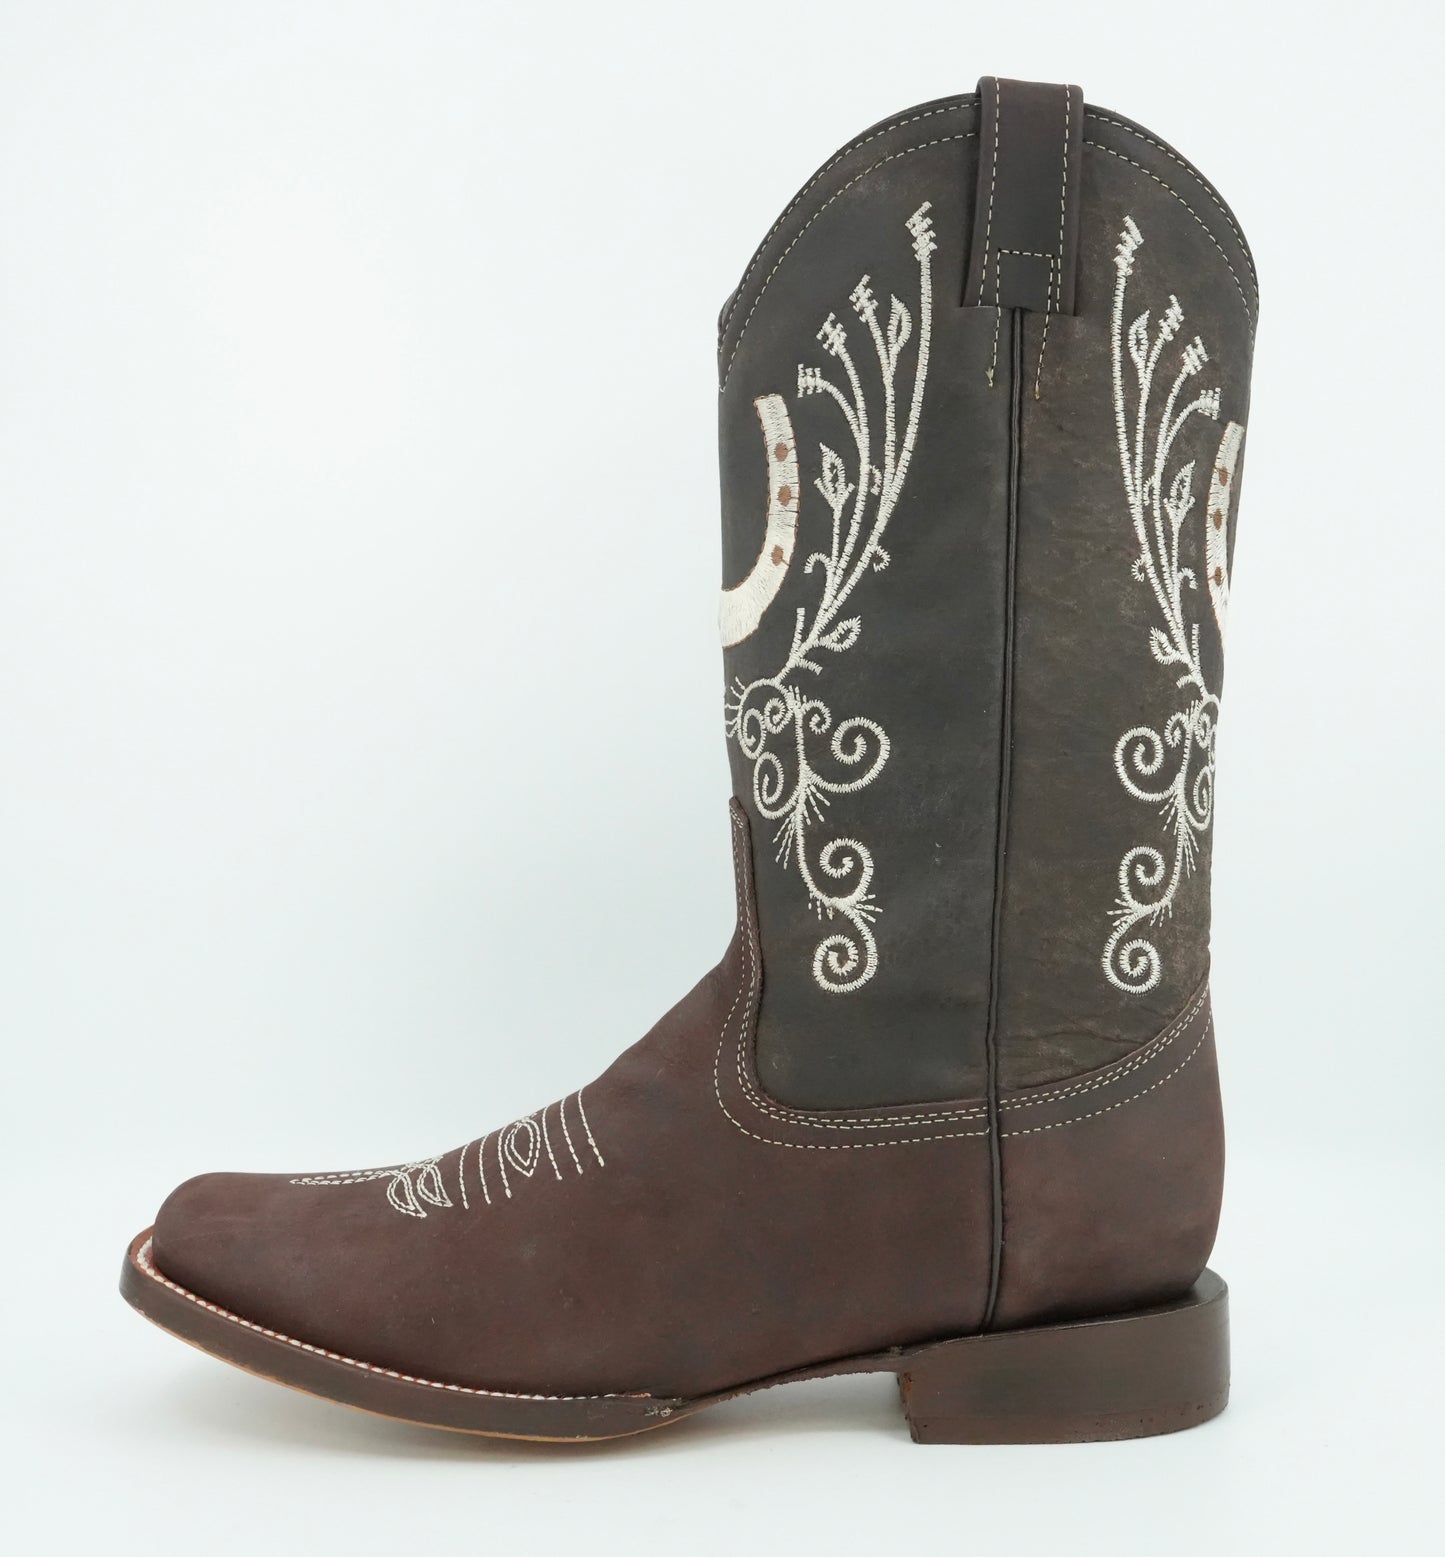 La Sierra Women's Brown Embroidered Horseshoes Square Toe Boot